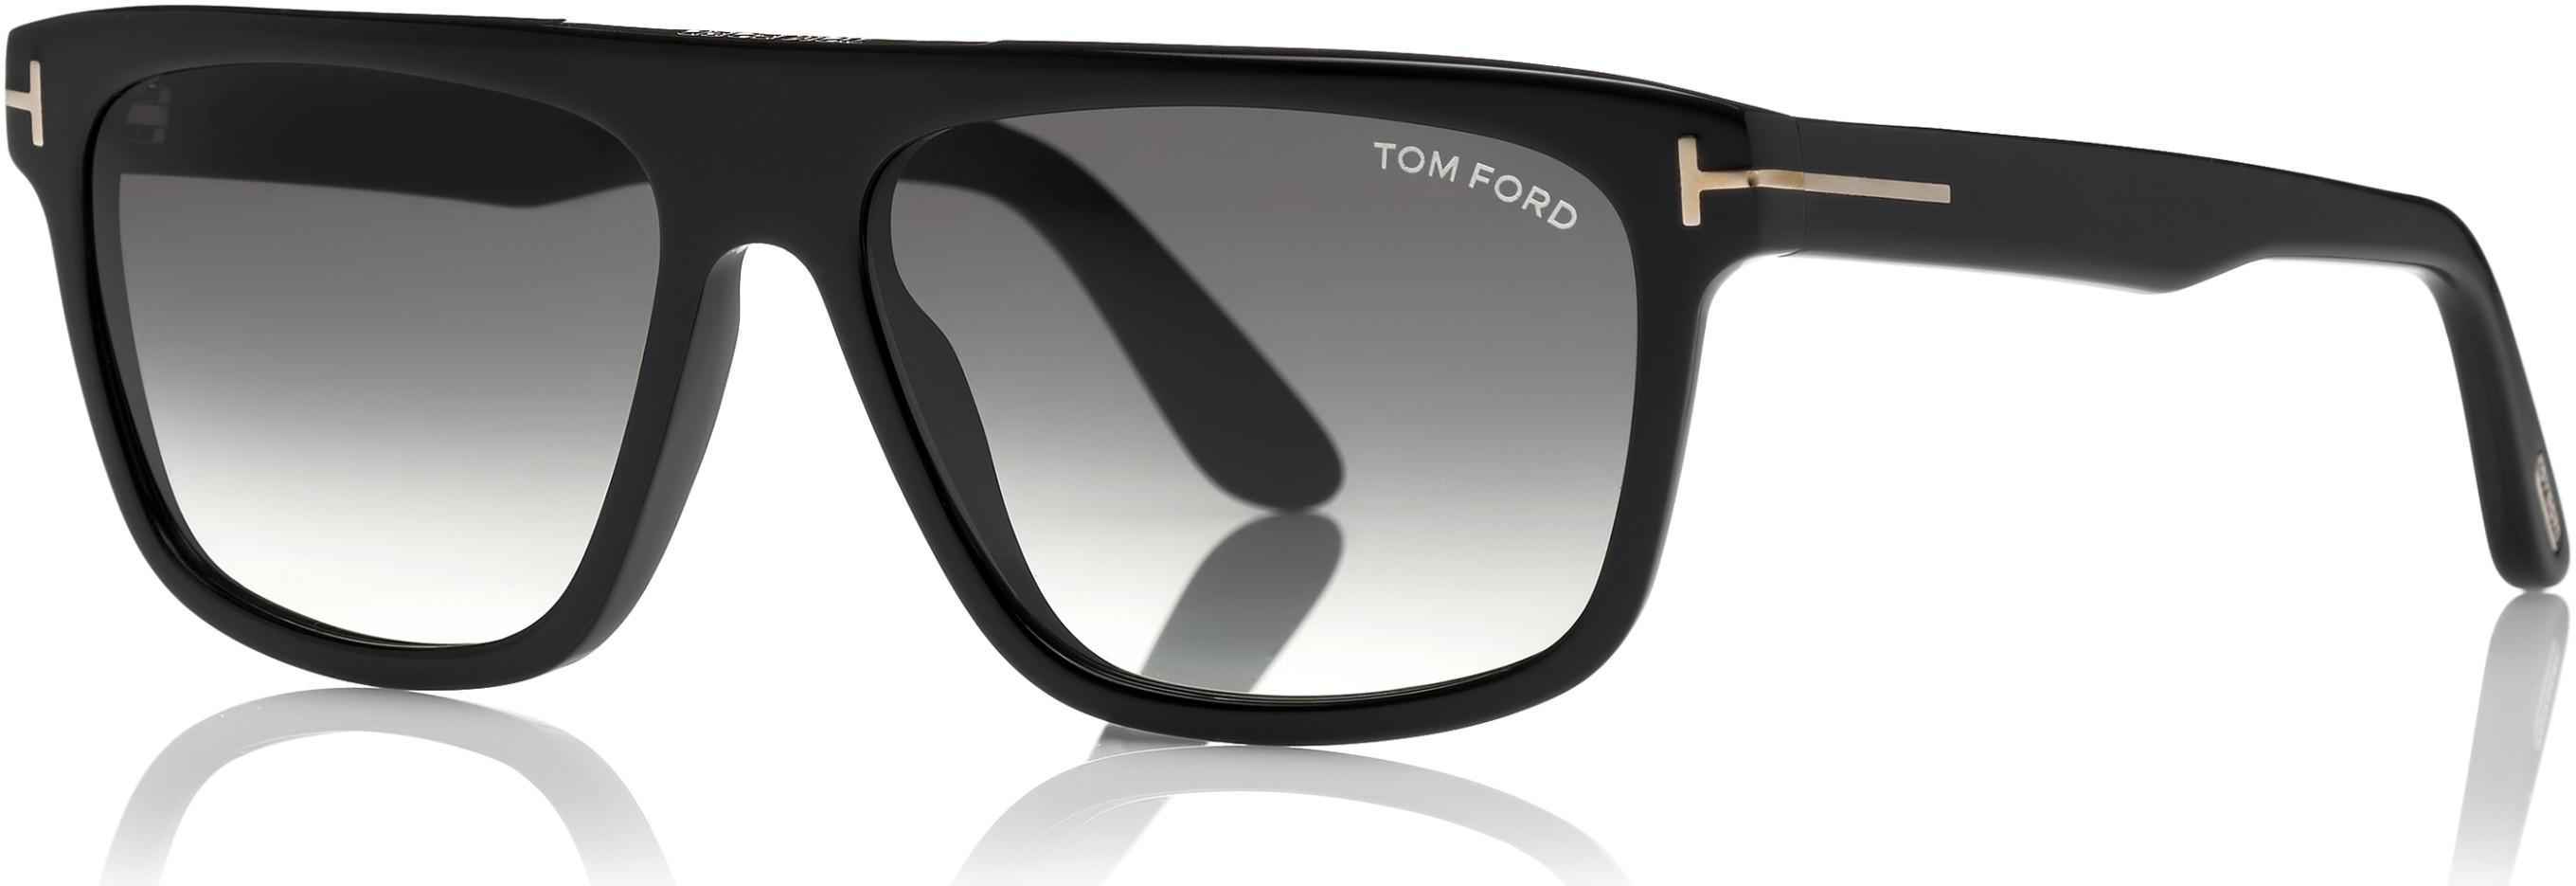 Amazon.com: Tom Ford GERARD-02 FT 0930 Black/Brown 56/19/145 men Sunglasses  : Clothing, Shoes & Jewelry